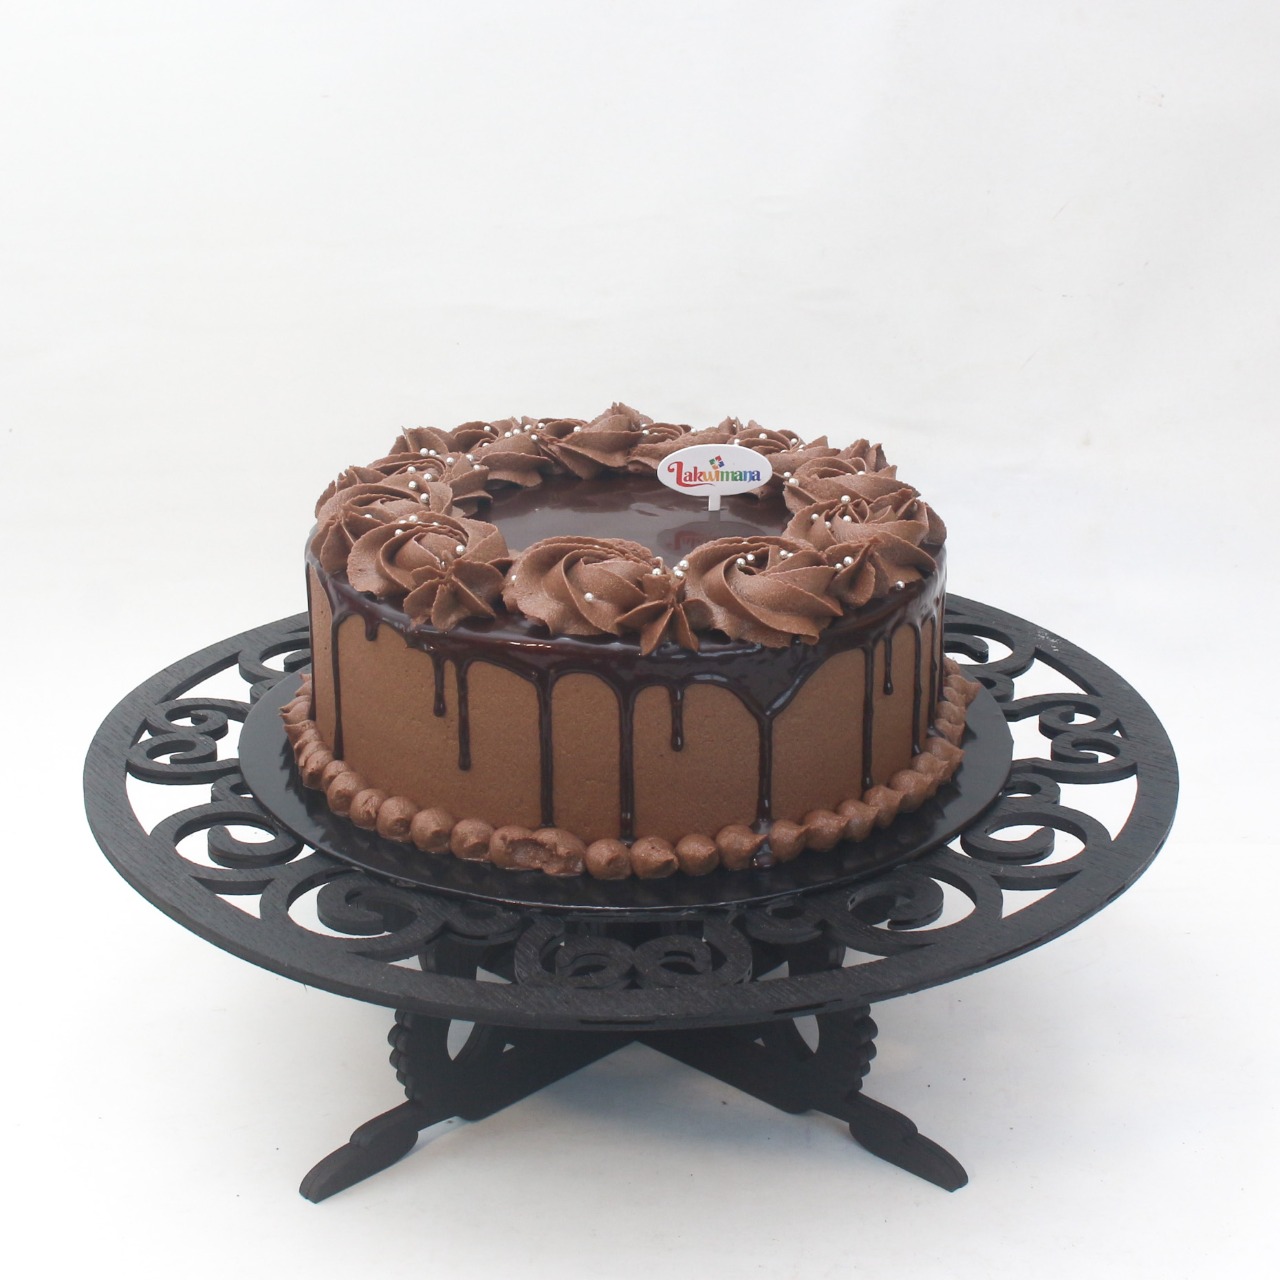 Chocolate Cake For Dad 1.5kg